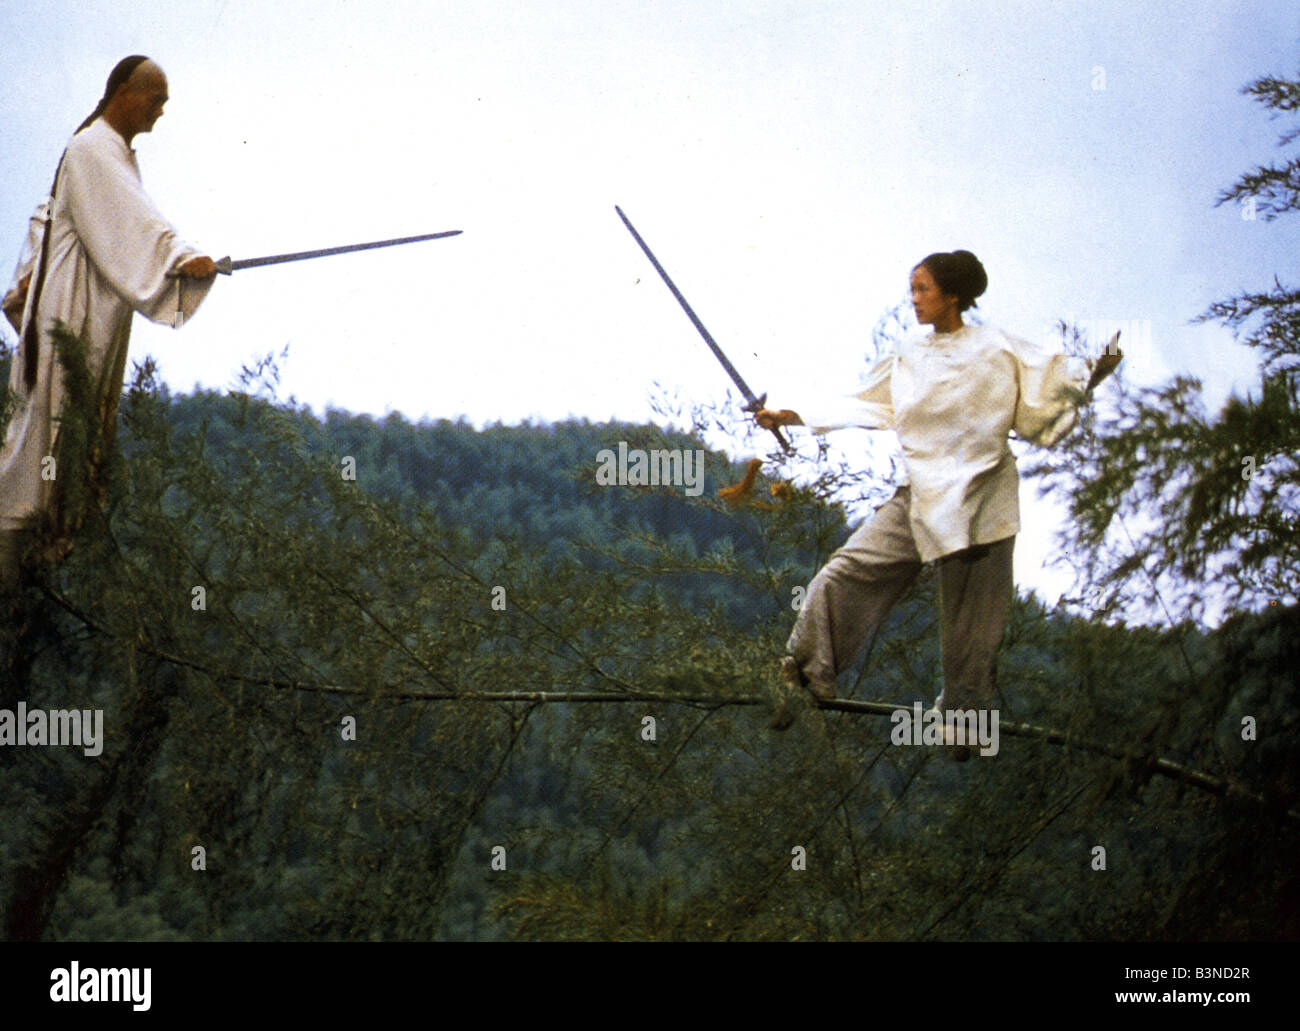 CROUCHING TIGER, HIDDEN DRAGON  2000 Columbia/TriStar film with Chow Yun-fat at left and Michelle Yeoh Stock Photo